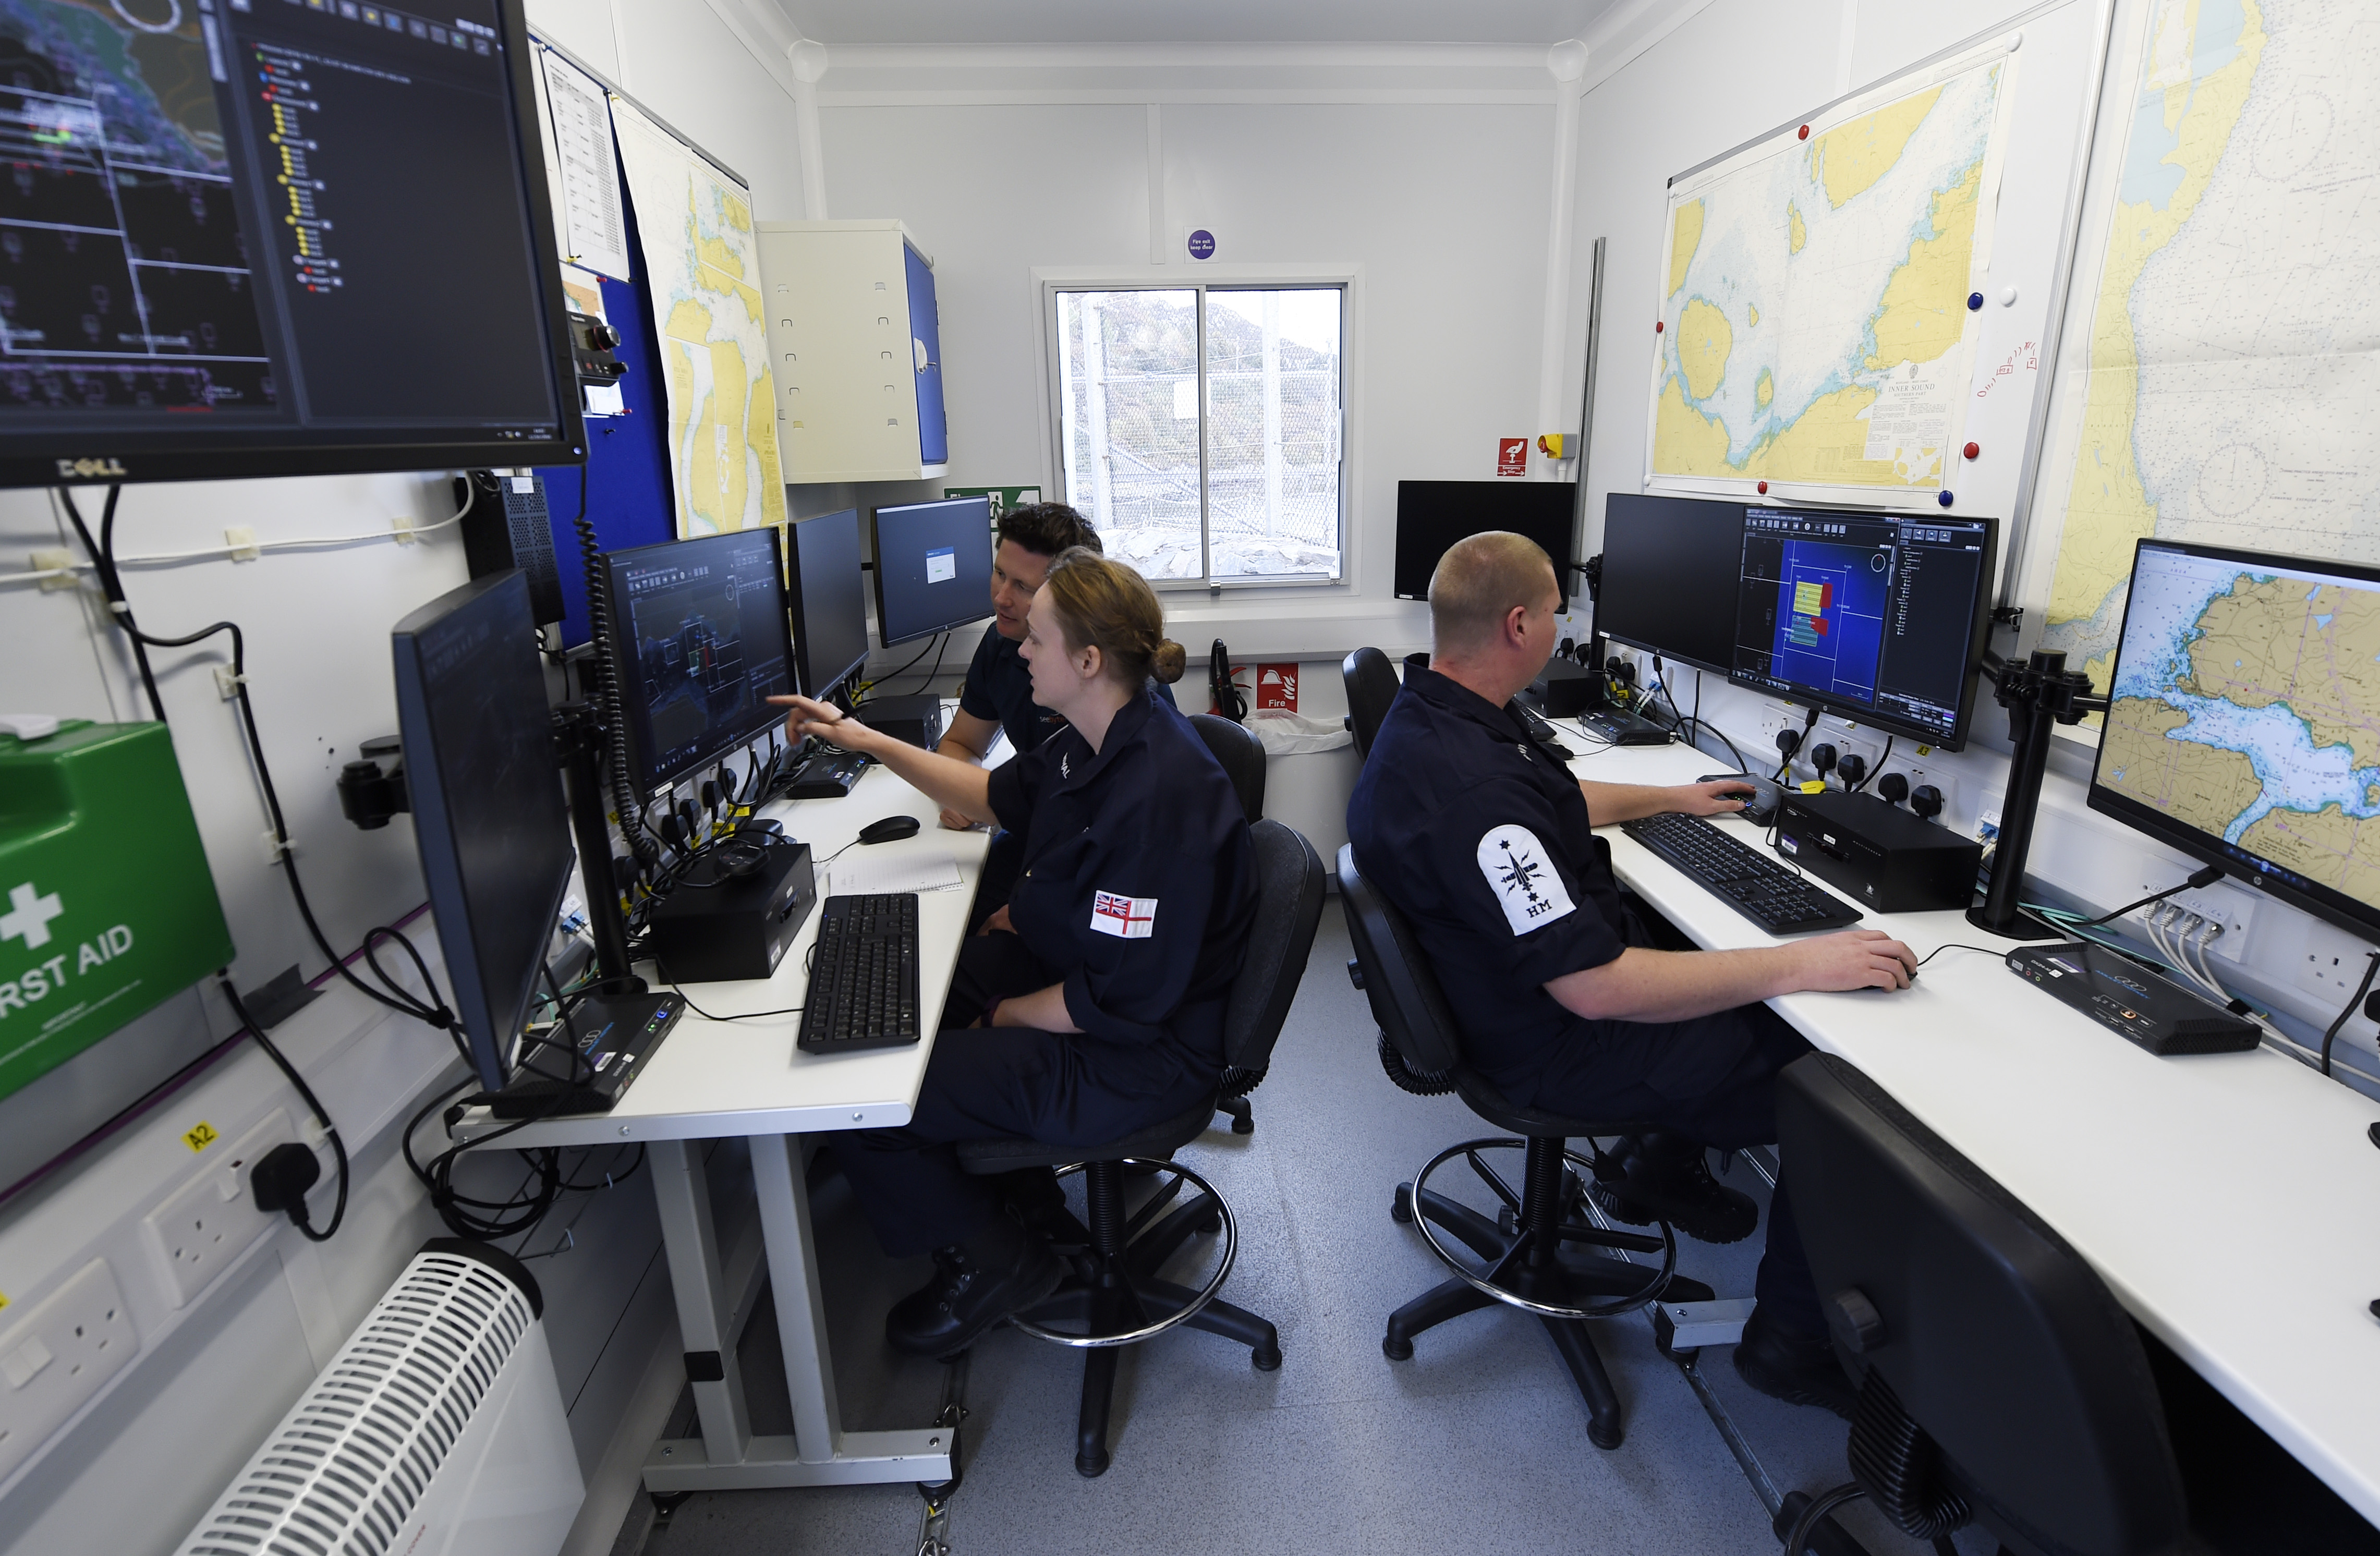 The command operations module located at the British Underwater Test & Evaluation Centre (BUTEC) during Unmanned Warrior (UW) 2016 allows for the control and tasking of unmanned vehicles from multiple suppliers using a generic workstation. The first-ever UW is a research and training exercise designed to test and demonstrate the latest in autonomous naval technologies while simultaneously strengthening international interoperability. T(U.S. Navy photo by John F. Williams)